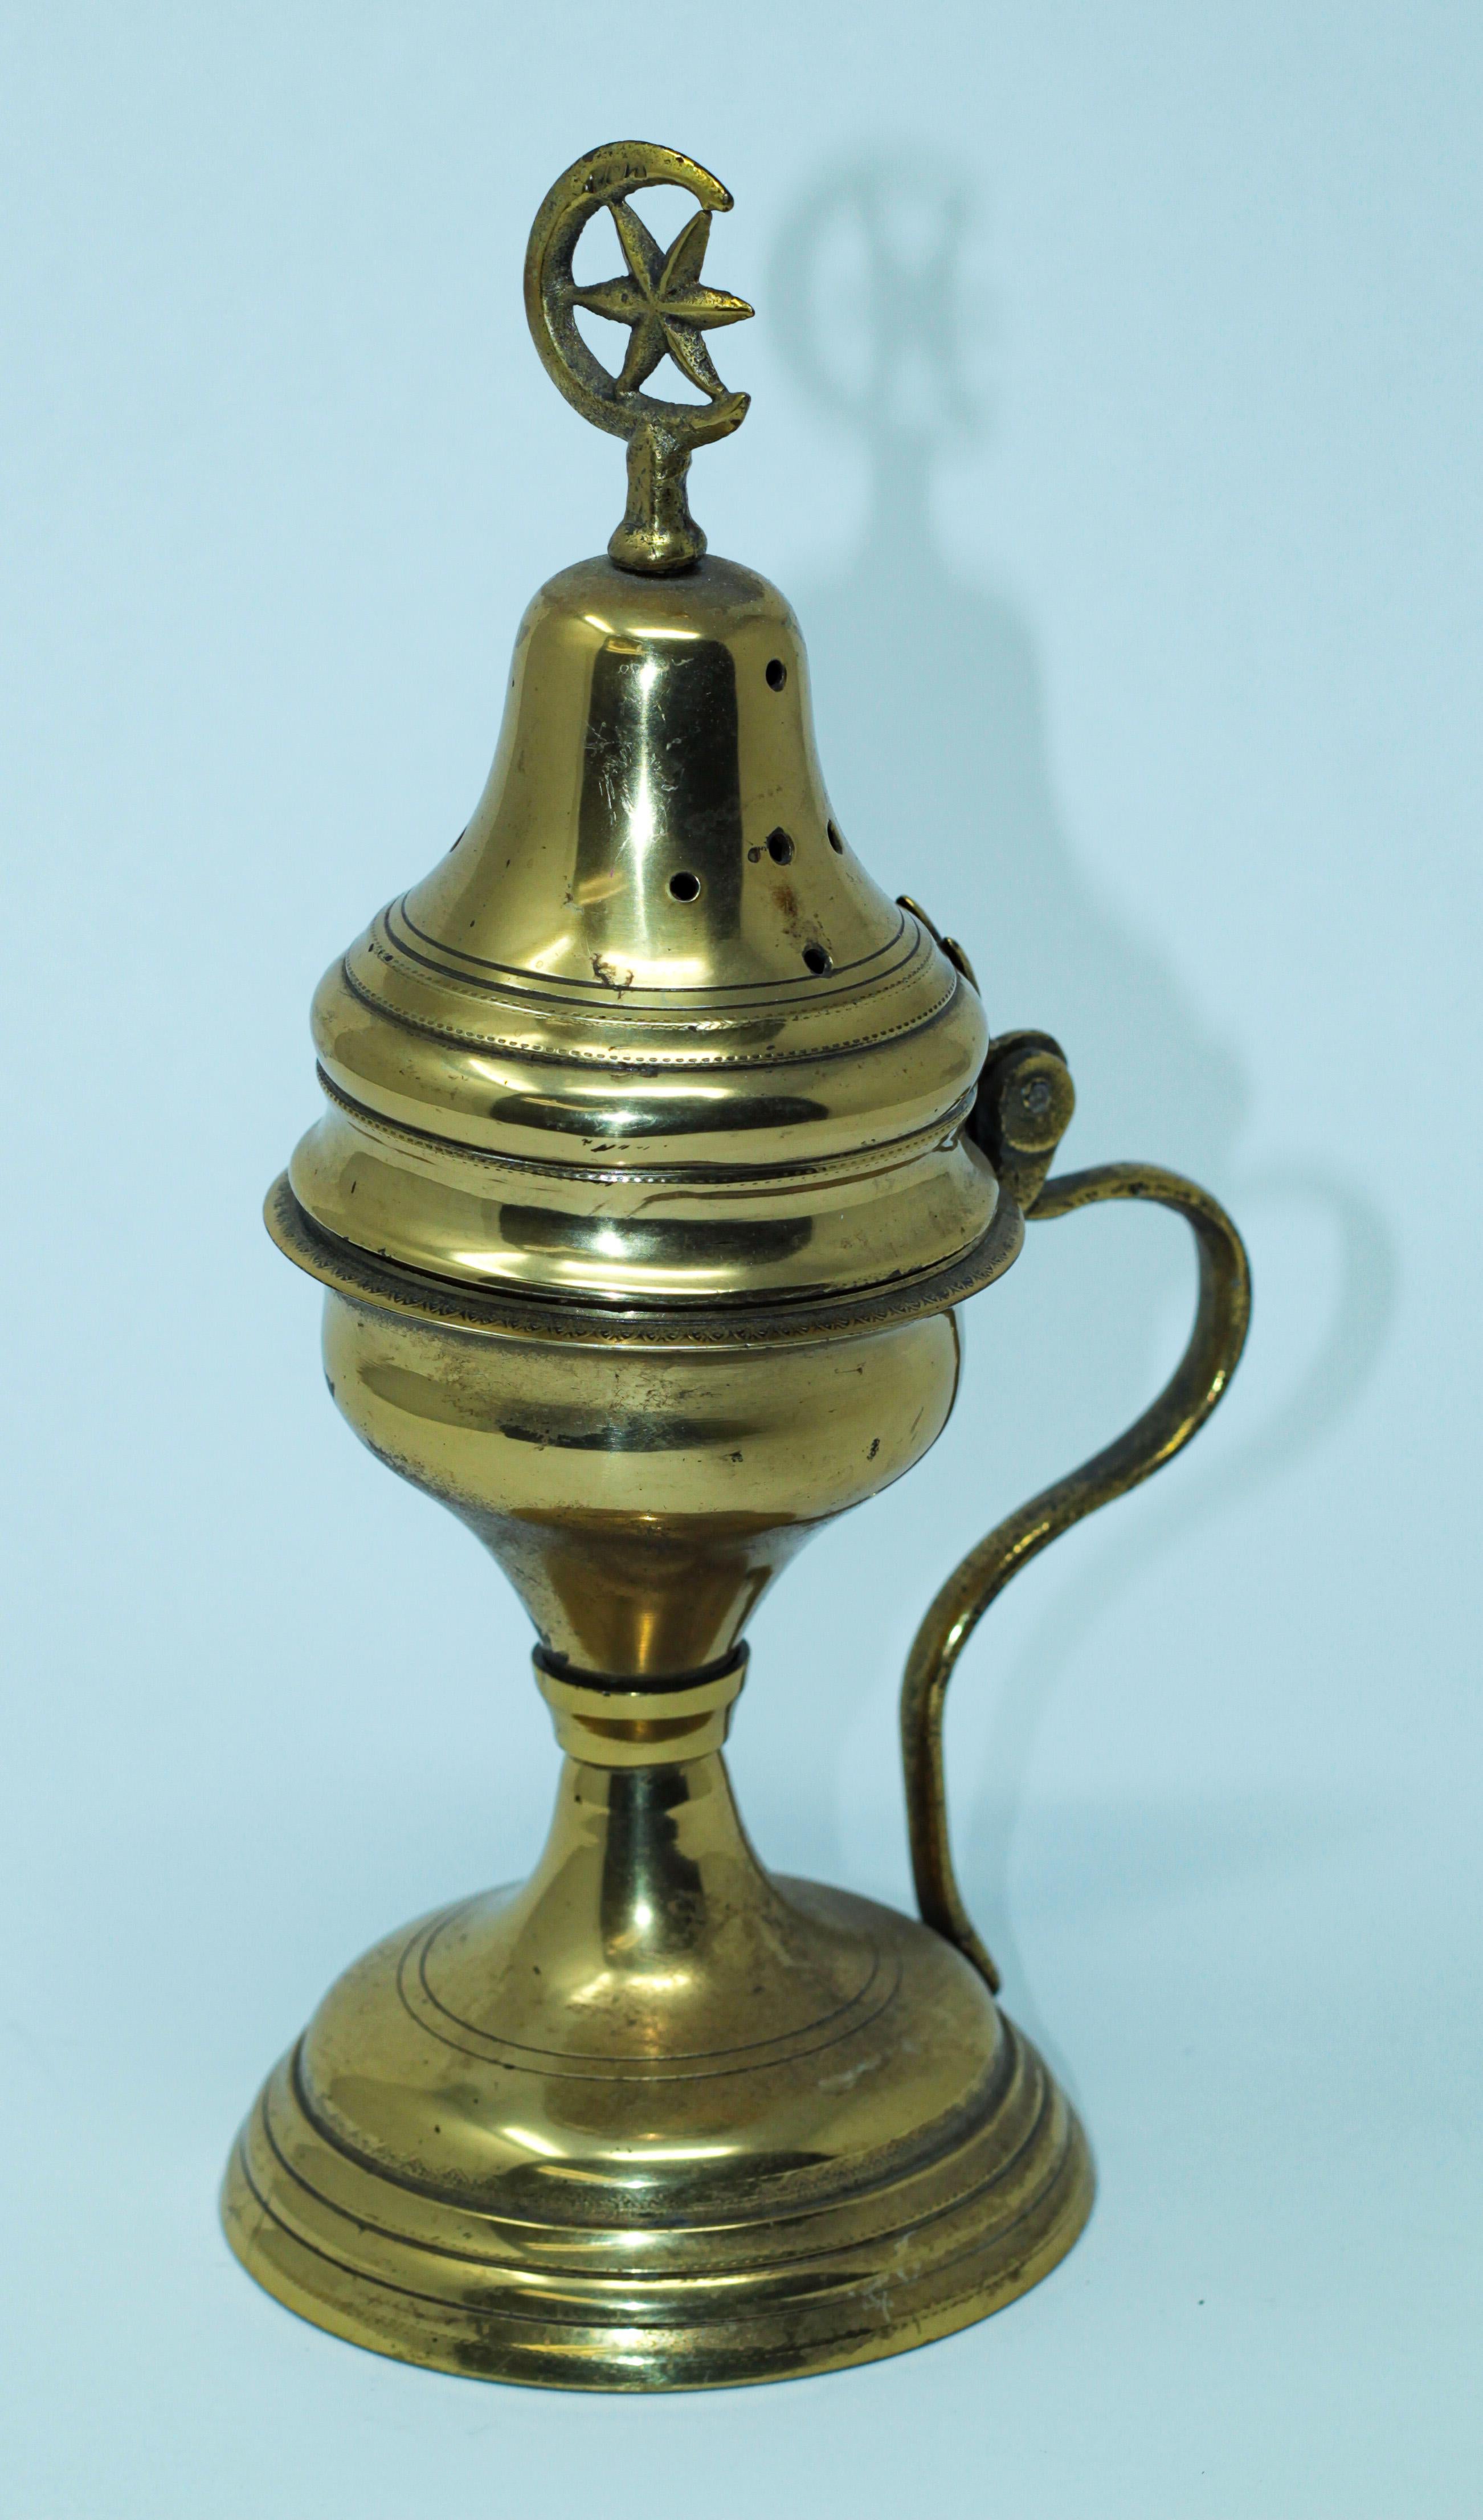 Polished Brass Incense Burner with Crescent Moon and Star Symbol 8